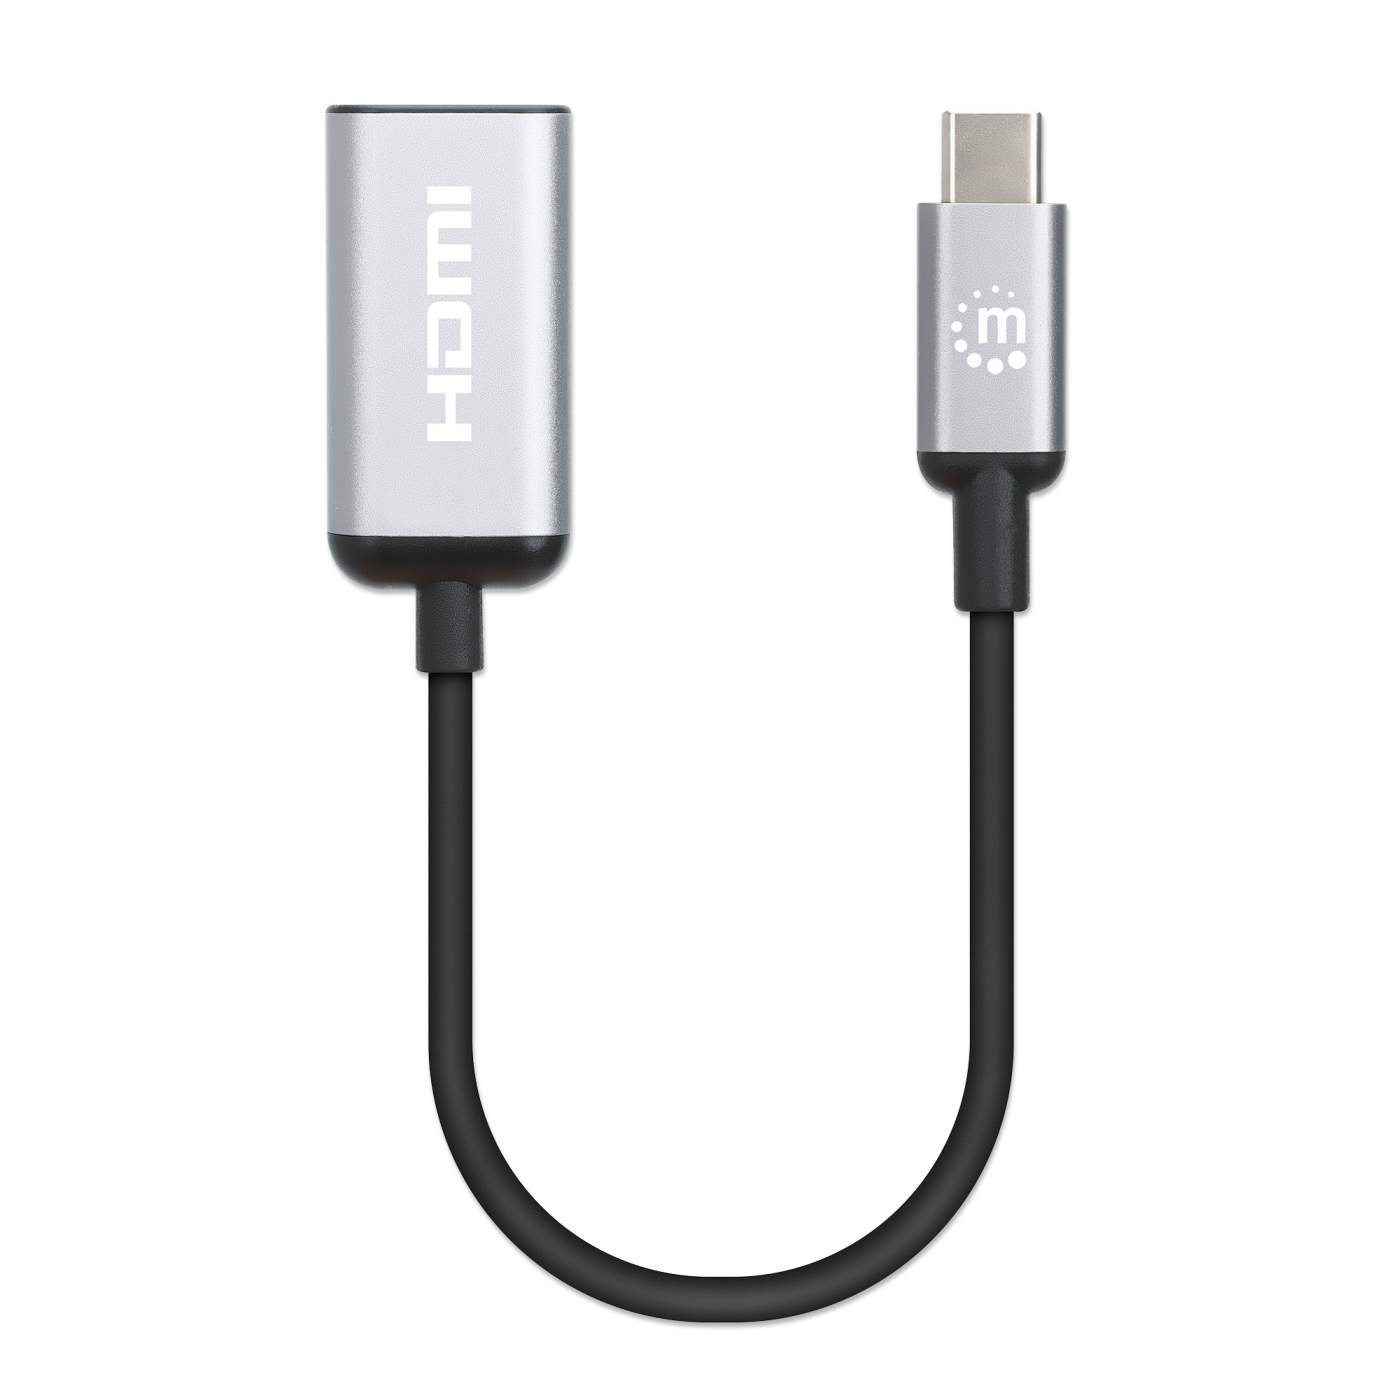 4K@60Hz USB-C to HDMI Adapter Image 5